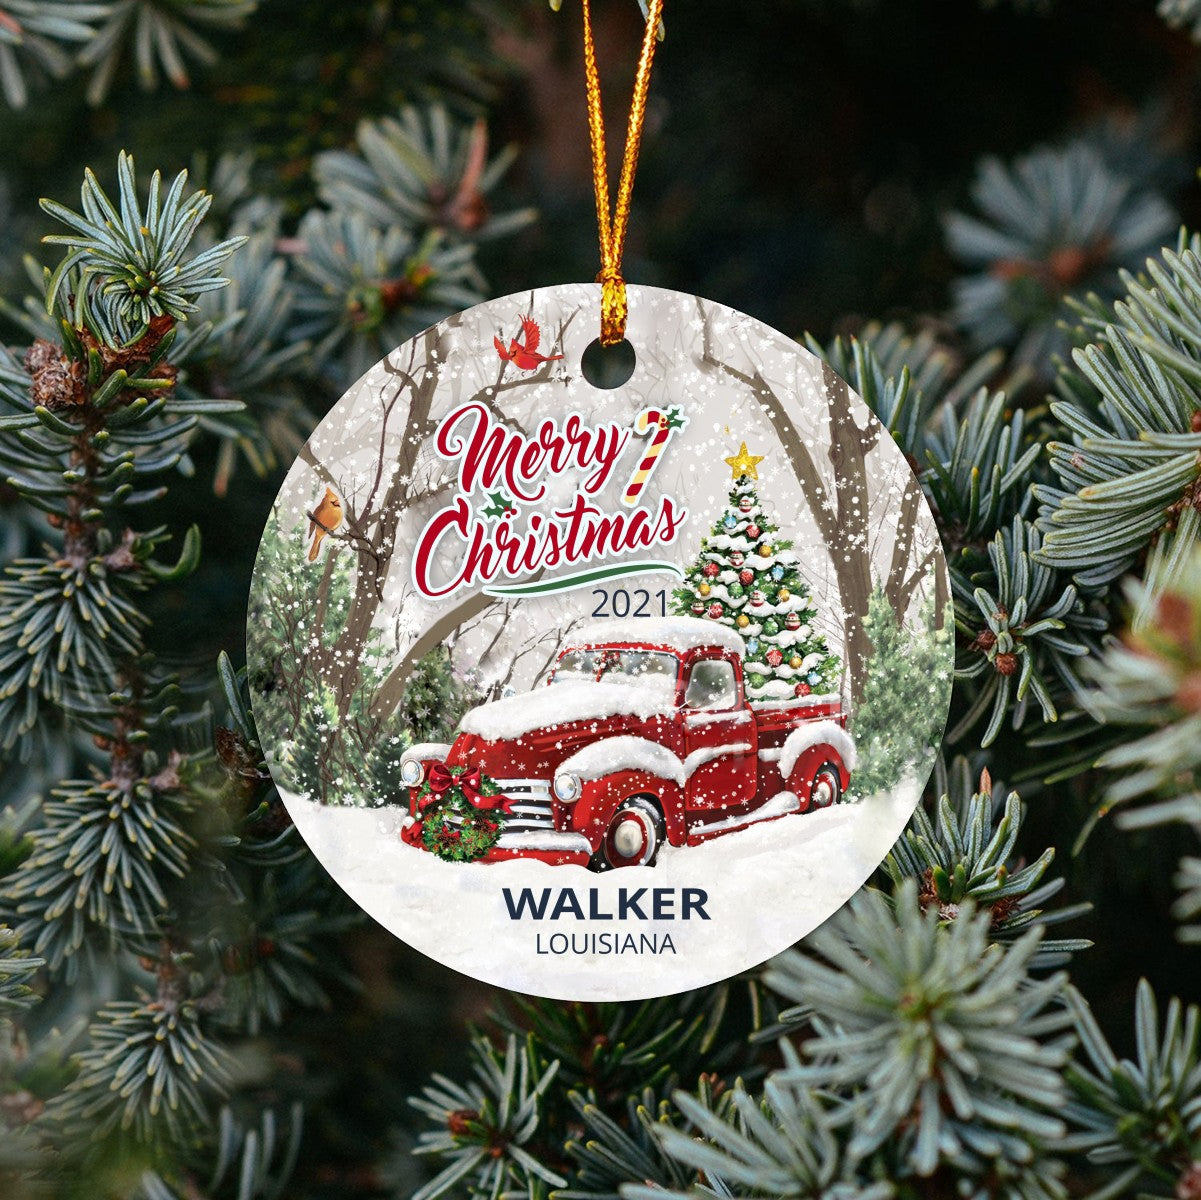 Christmas Tree Ornaments Walker - Ornament With Name City, State Walker Louisiana LA Ornament - Red Truck Xmas Ornaments 3'' Plastic Gift For Family, Friend And Housewarming